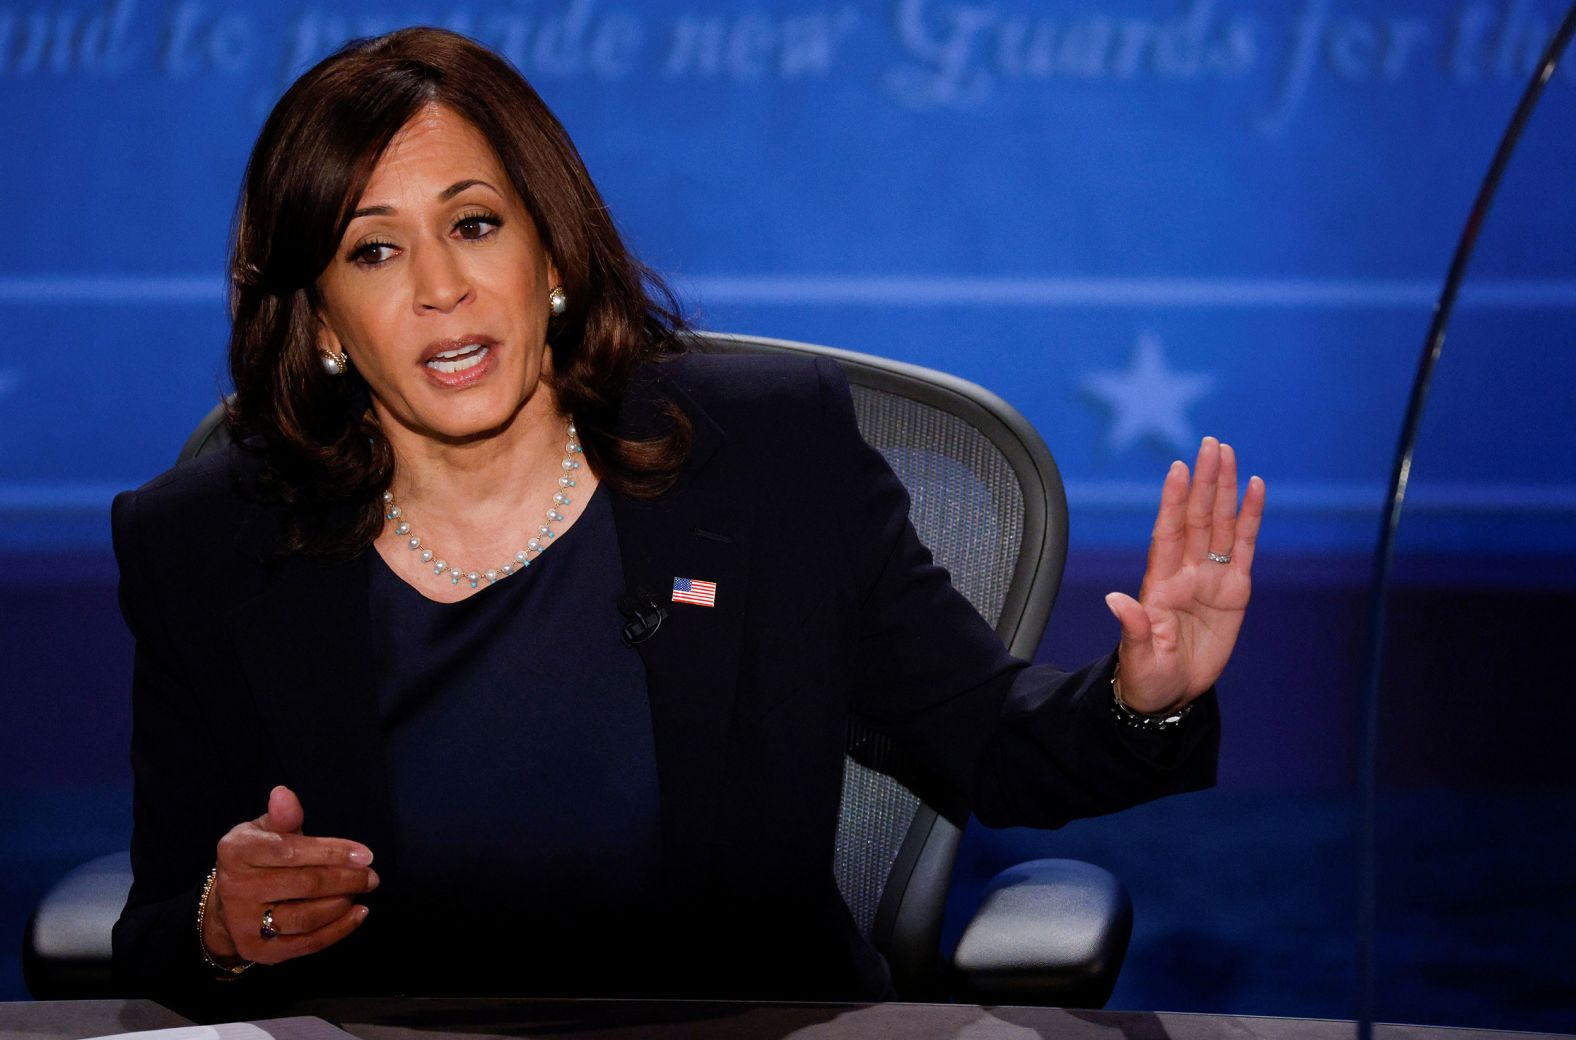 Harris gestures at Pence while answering a question during the debate. She made history Wednesday, becoming the first Black and South Asian woman to participate in a general election debate.